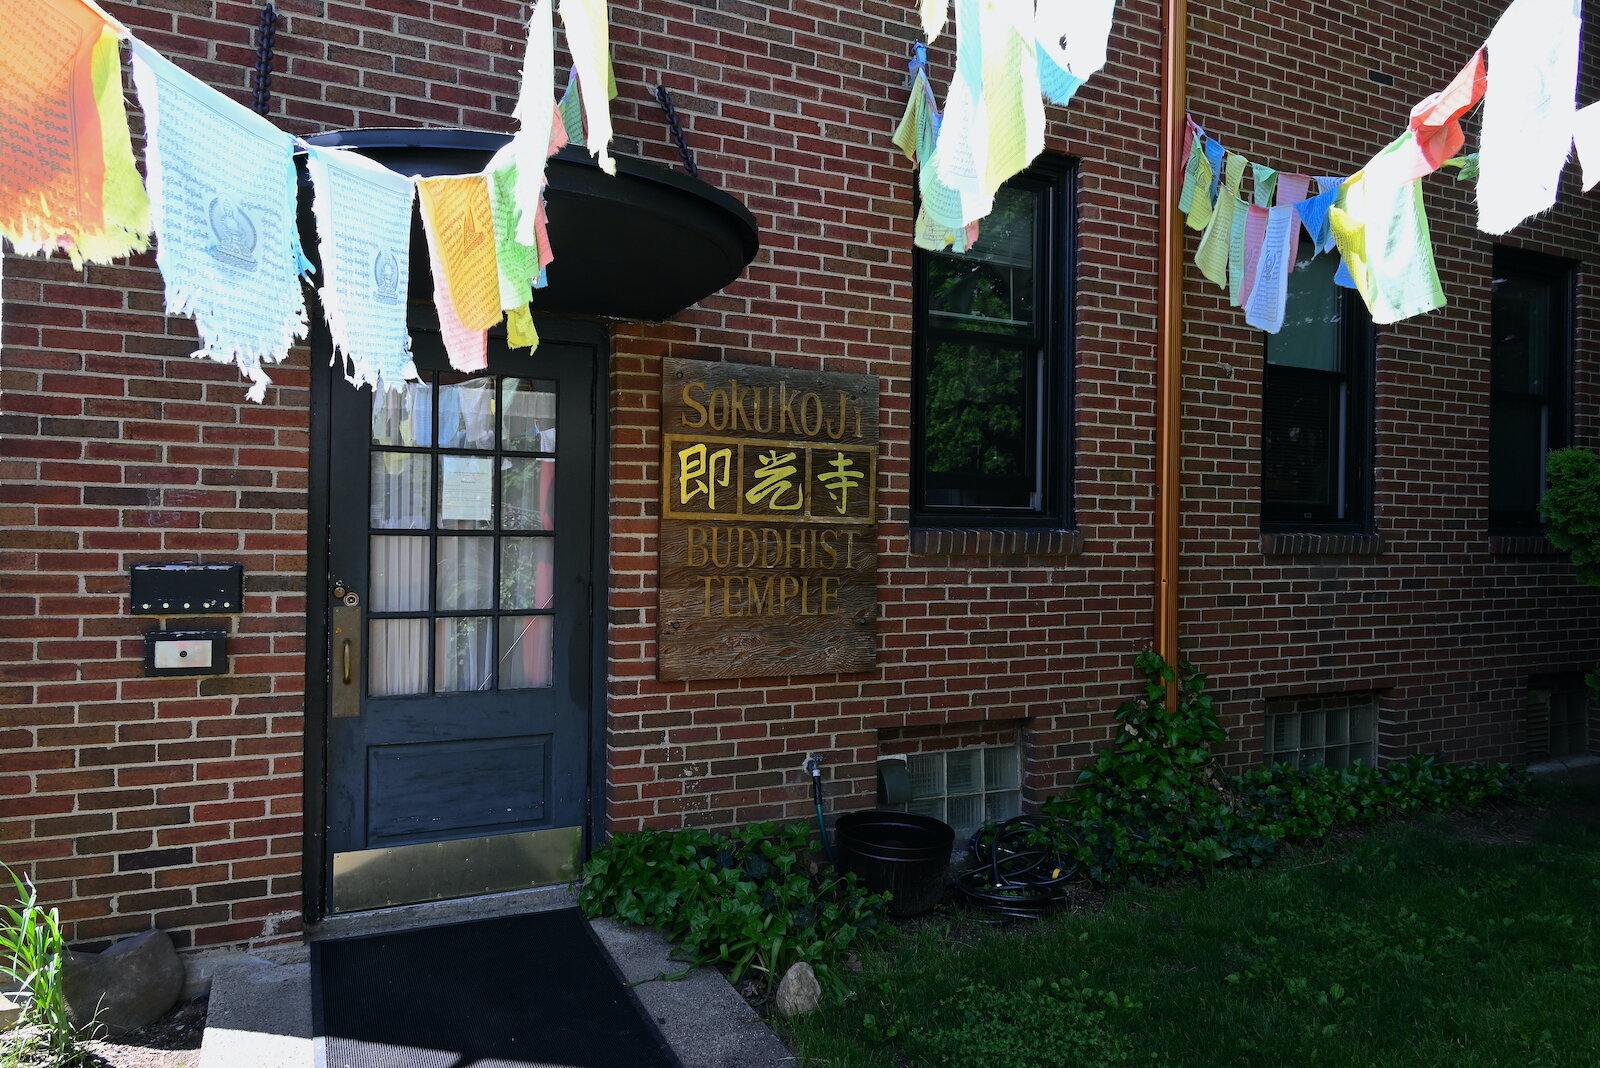 This is the courtyard and entrance to he SokukoJi Buddhist Temple Monastery in Battle Creek.